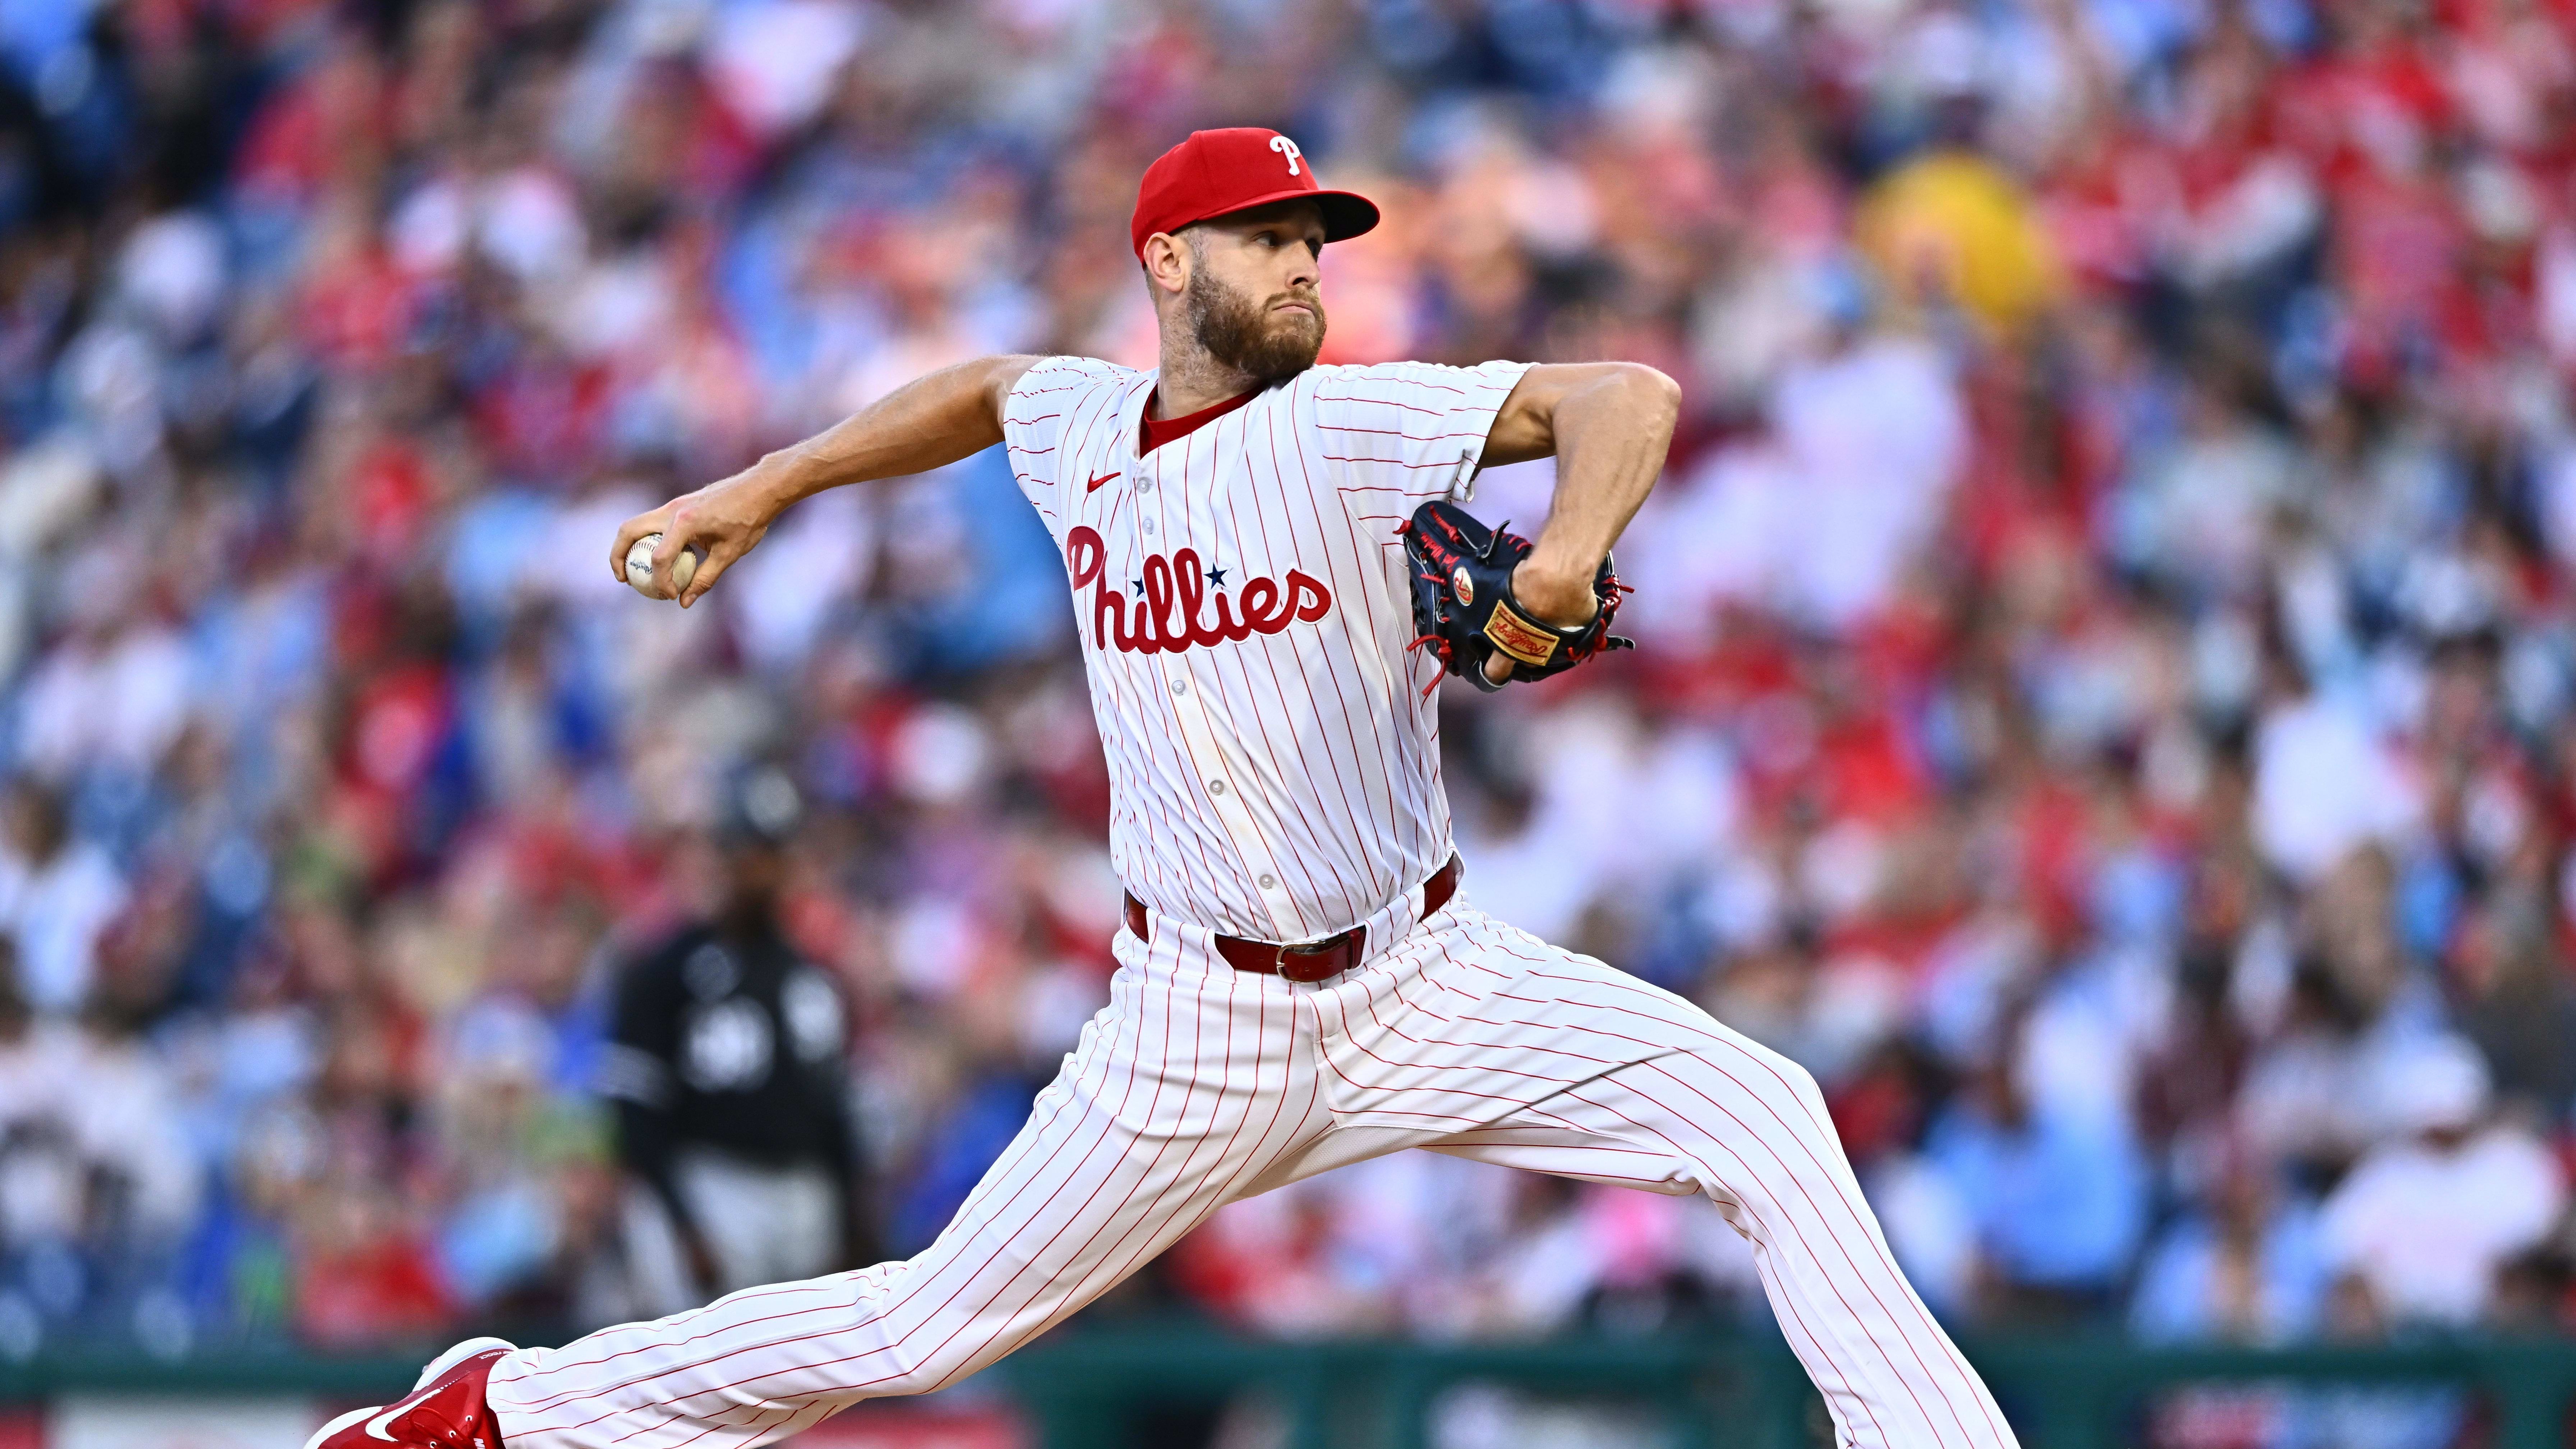 Philadelphia Phillies starting pitcher Zack Wheeler took a no-hitter into the eighth inning against the Chicago White Sox